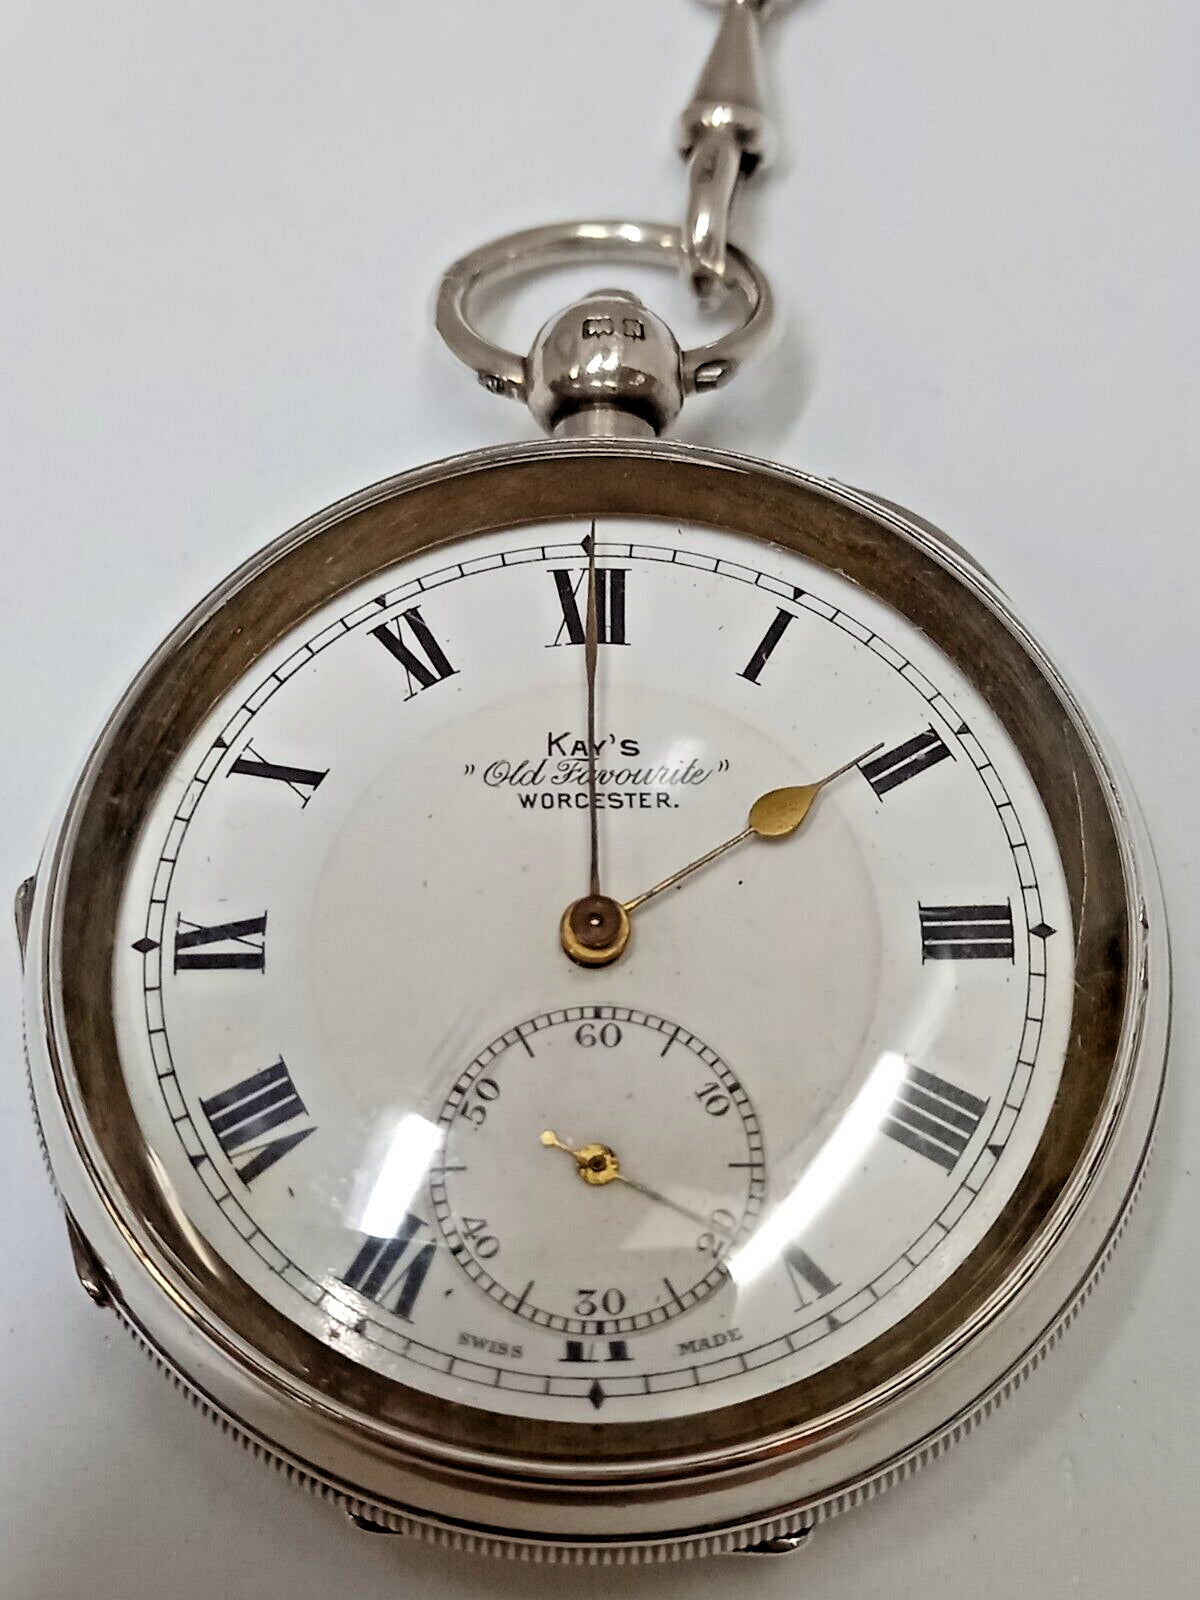 Bid on A1930 SILVER KAYS “OLD FAVOURITE” POCKET WATCH. WITH ORIGINAL HEAVY SILVER CHAIN- Buy &amp; Sell on Auction with EAMA Group